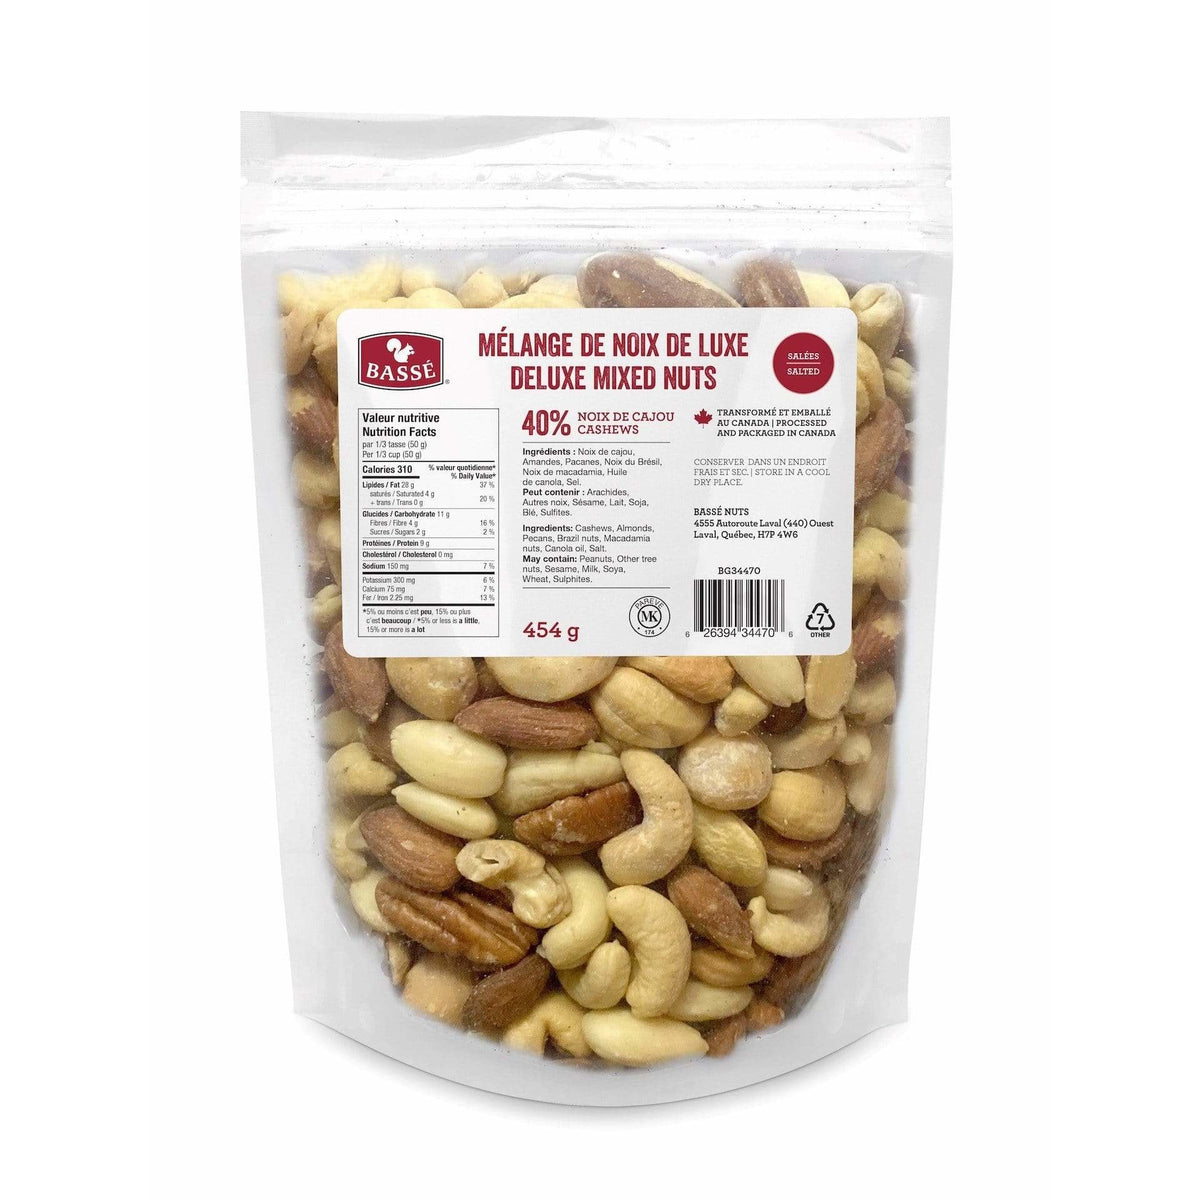 Deluxe Mixed Nuts, Roasted and Salted or Roasted Unsalted — Mound